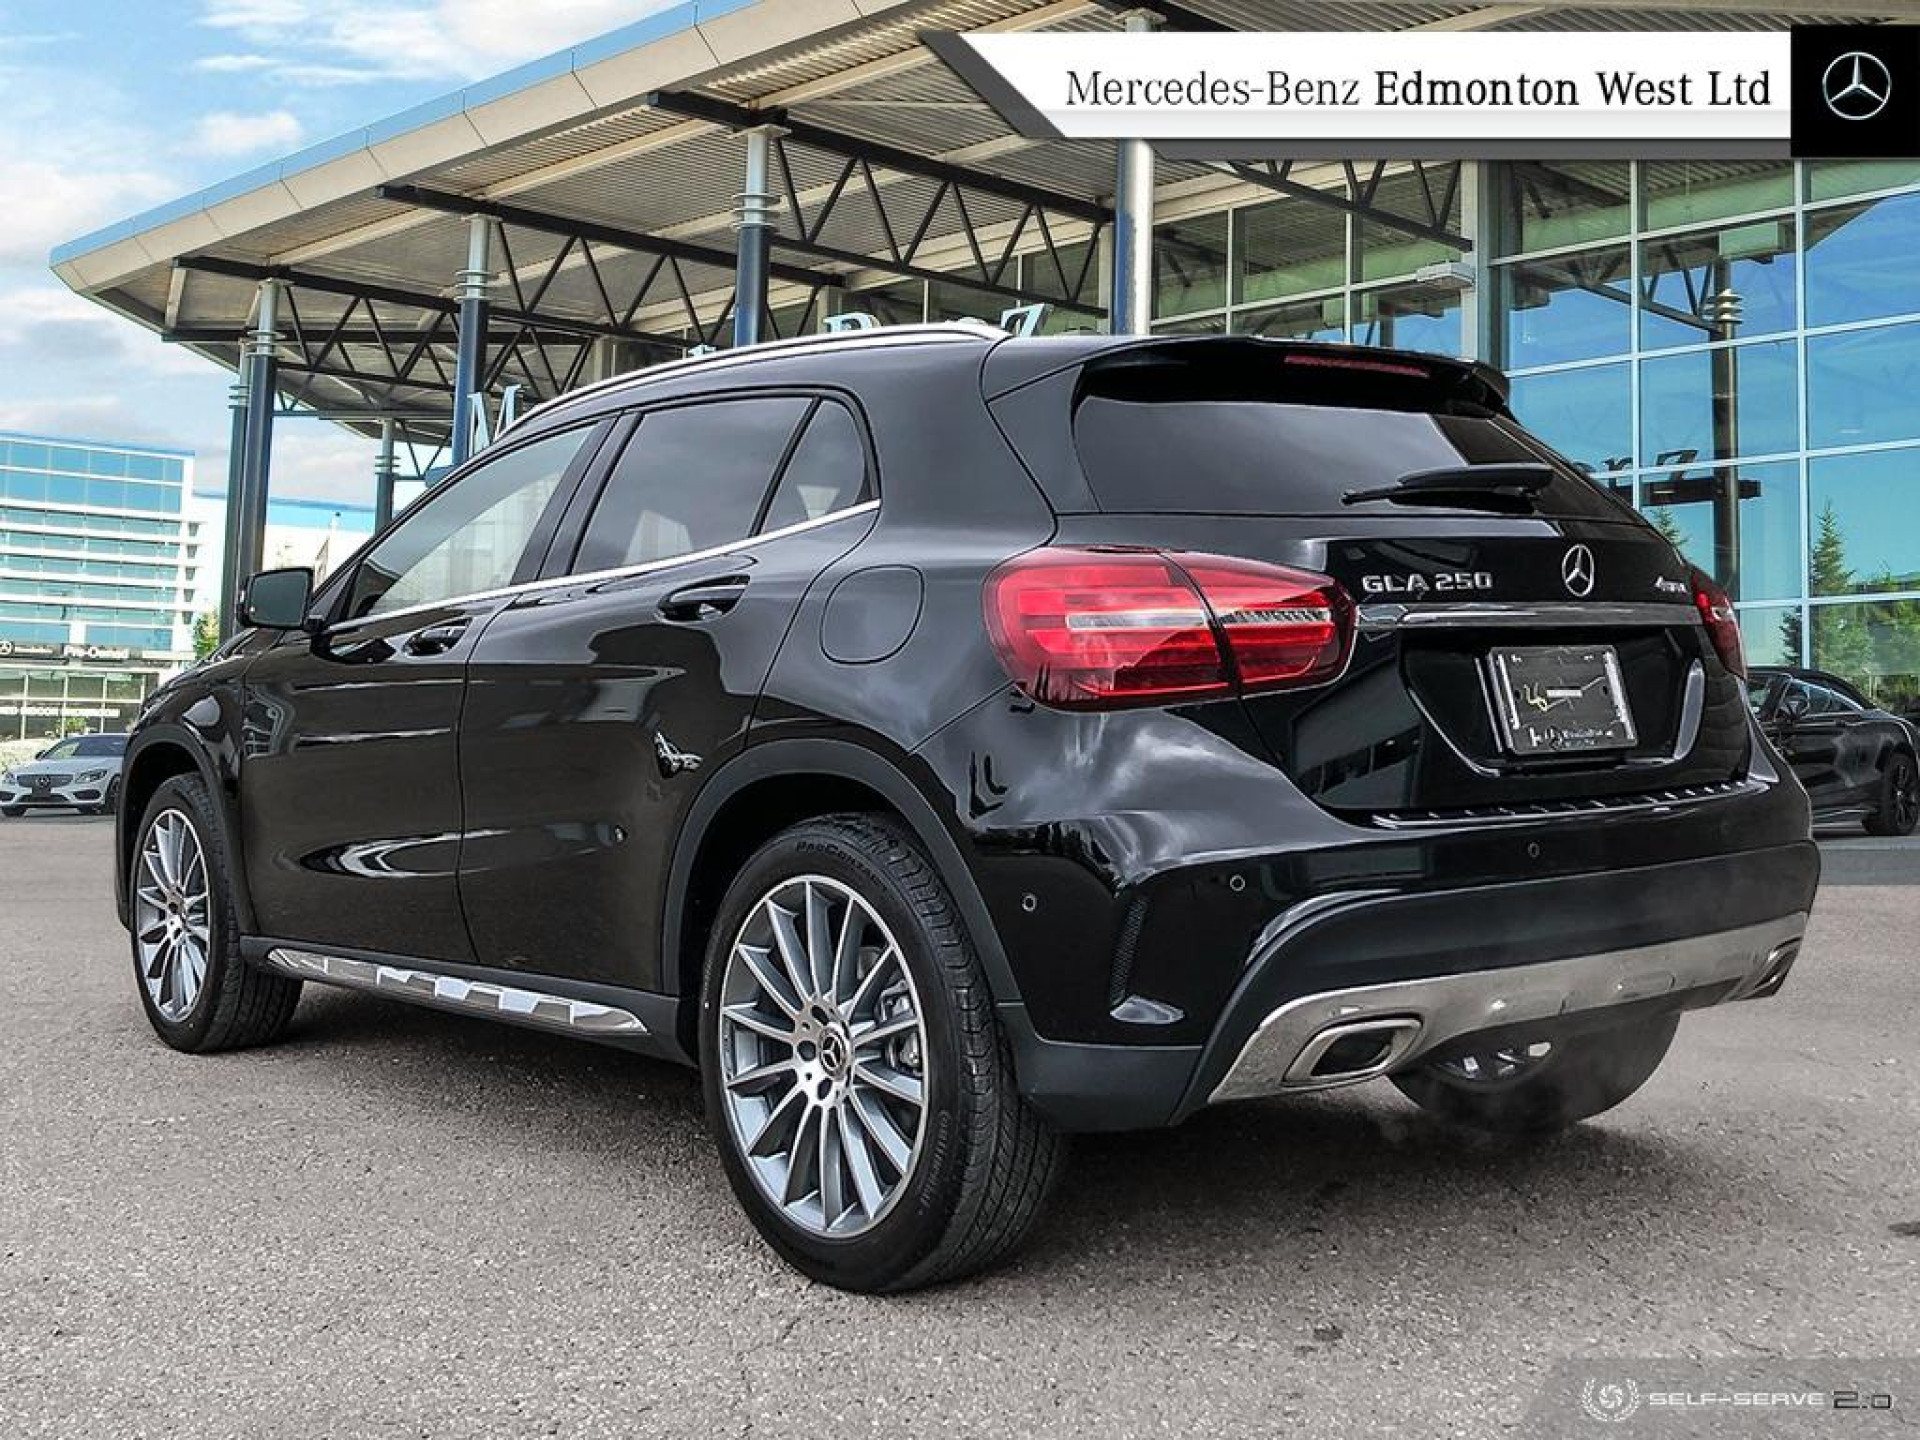 Pre-Owned 2020 Mercedes Benz GLA 250 4MATIC Demonstration Vehicle